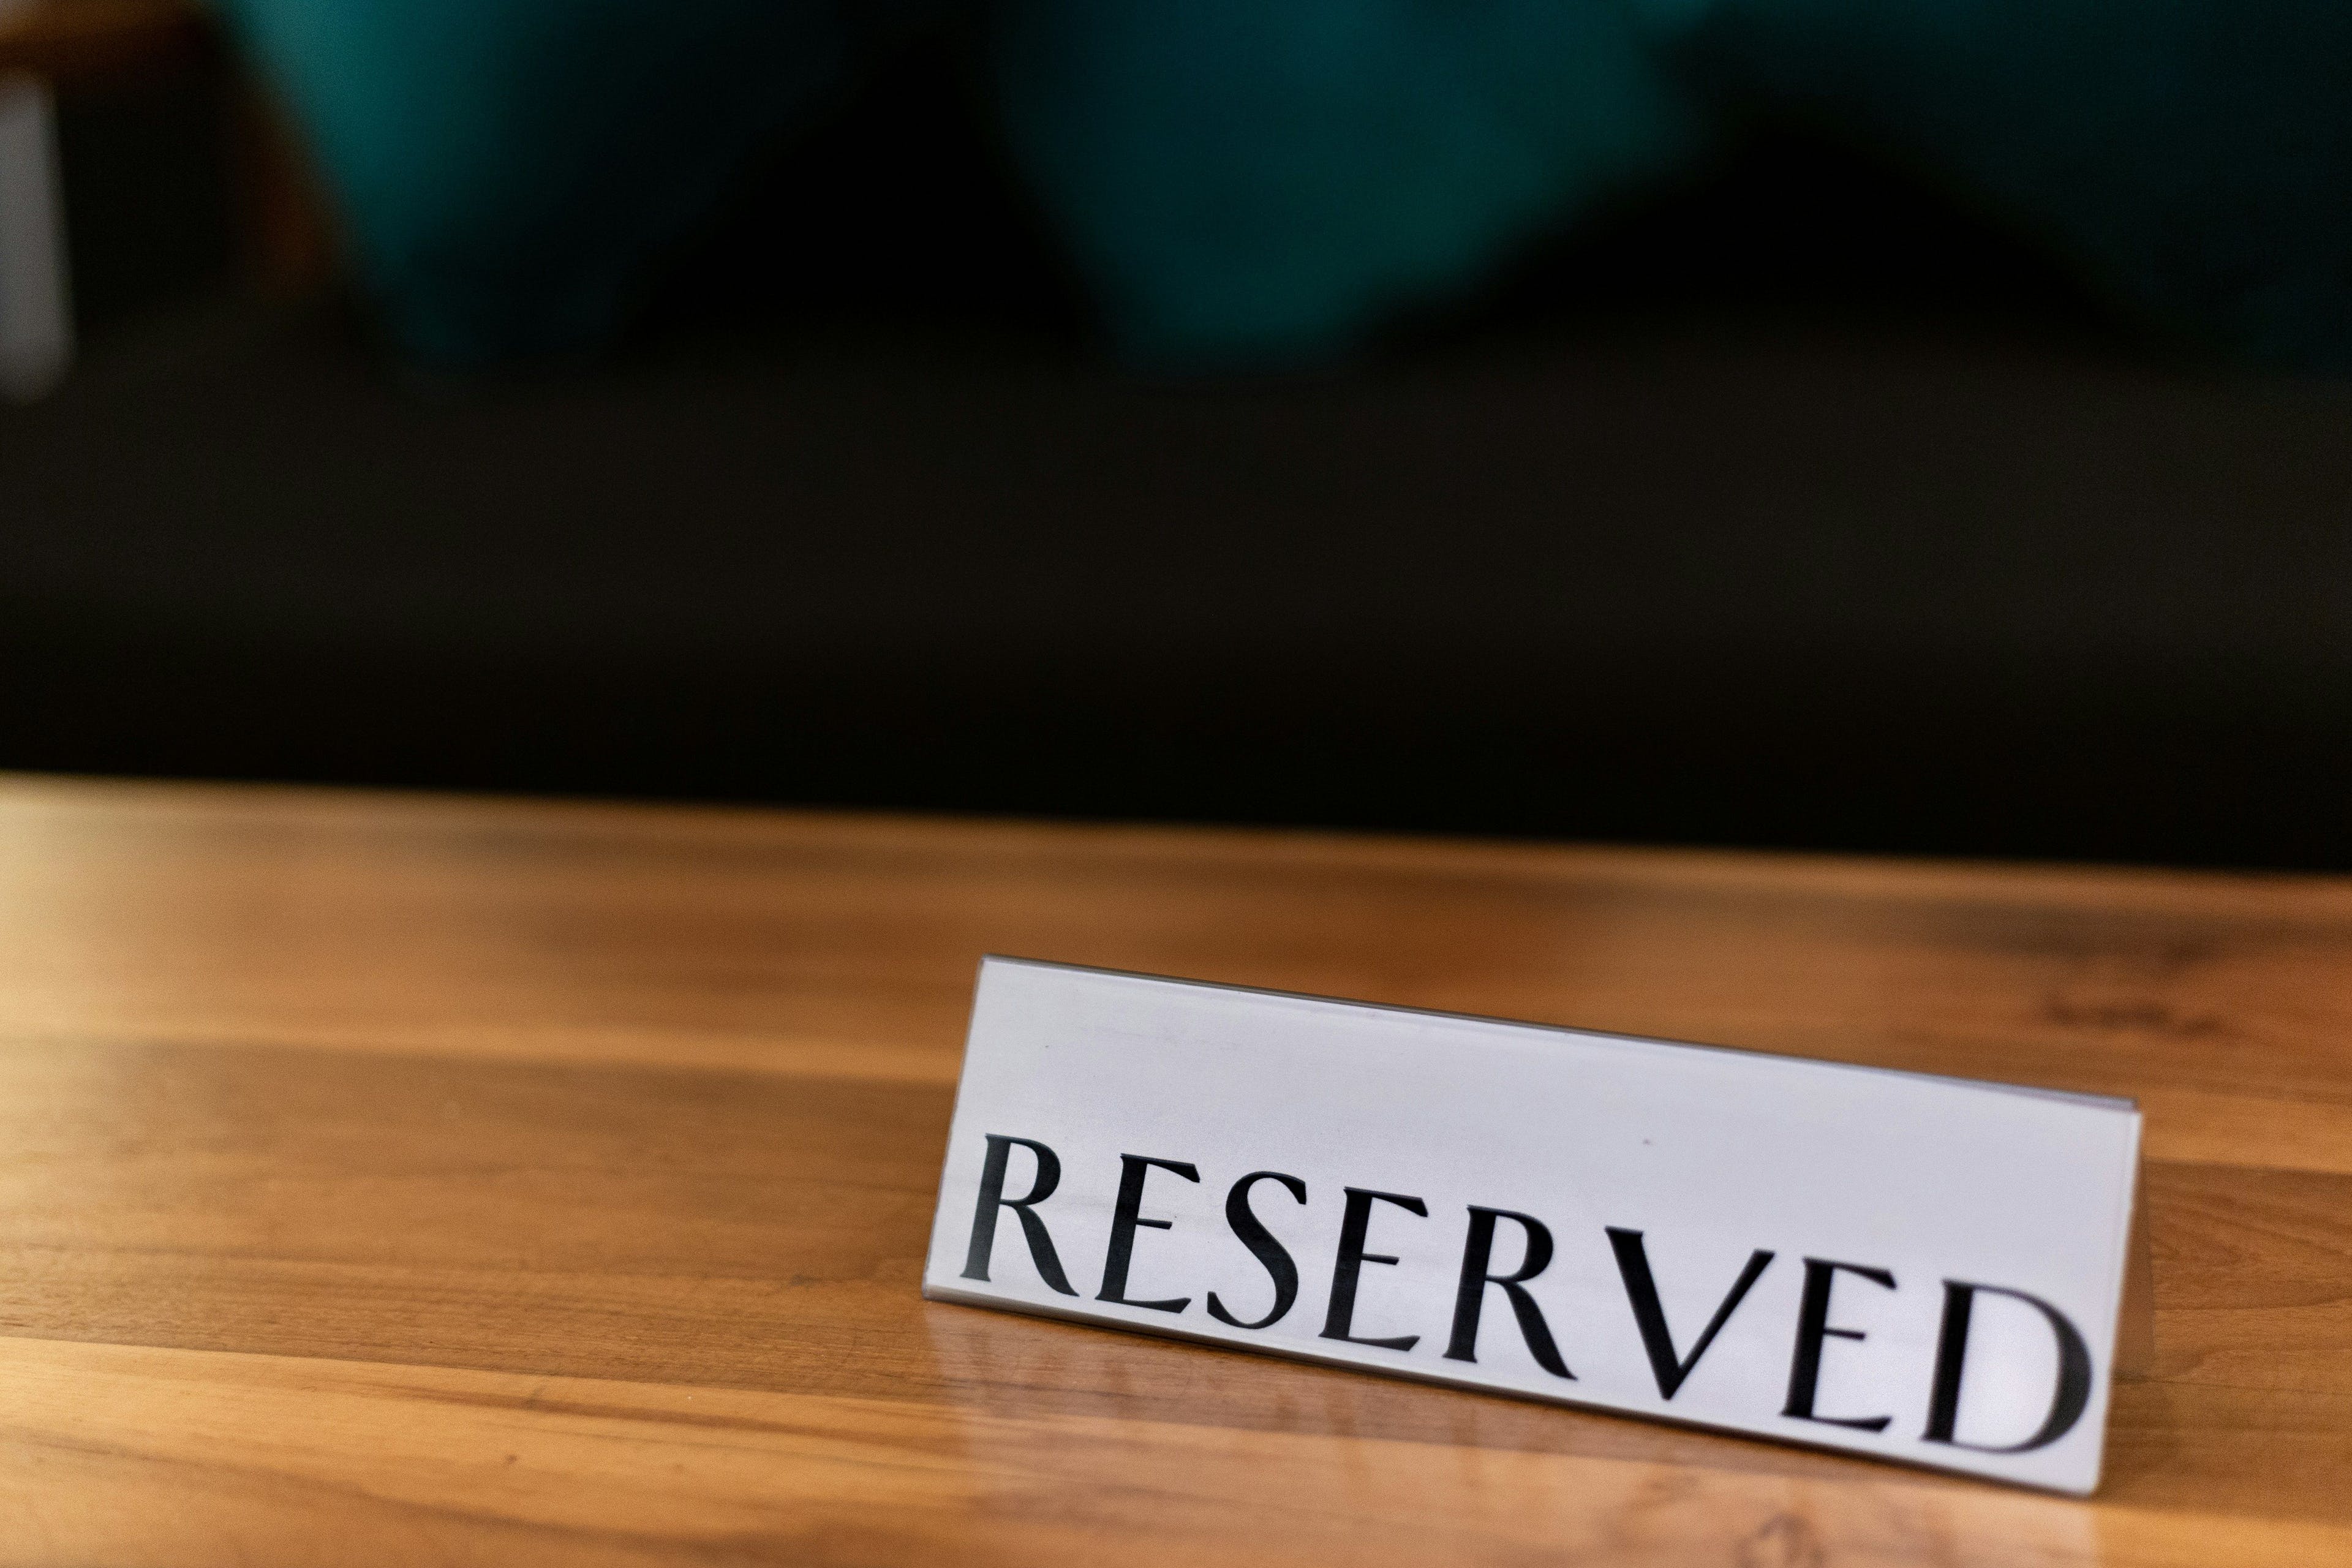 A close-up view of a 'RESERVED' sign placed on a polished wooden table in a restaurant, with plush teal cushions in the background, signaling an exclusive dining space awaiting its guests.